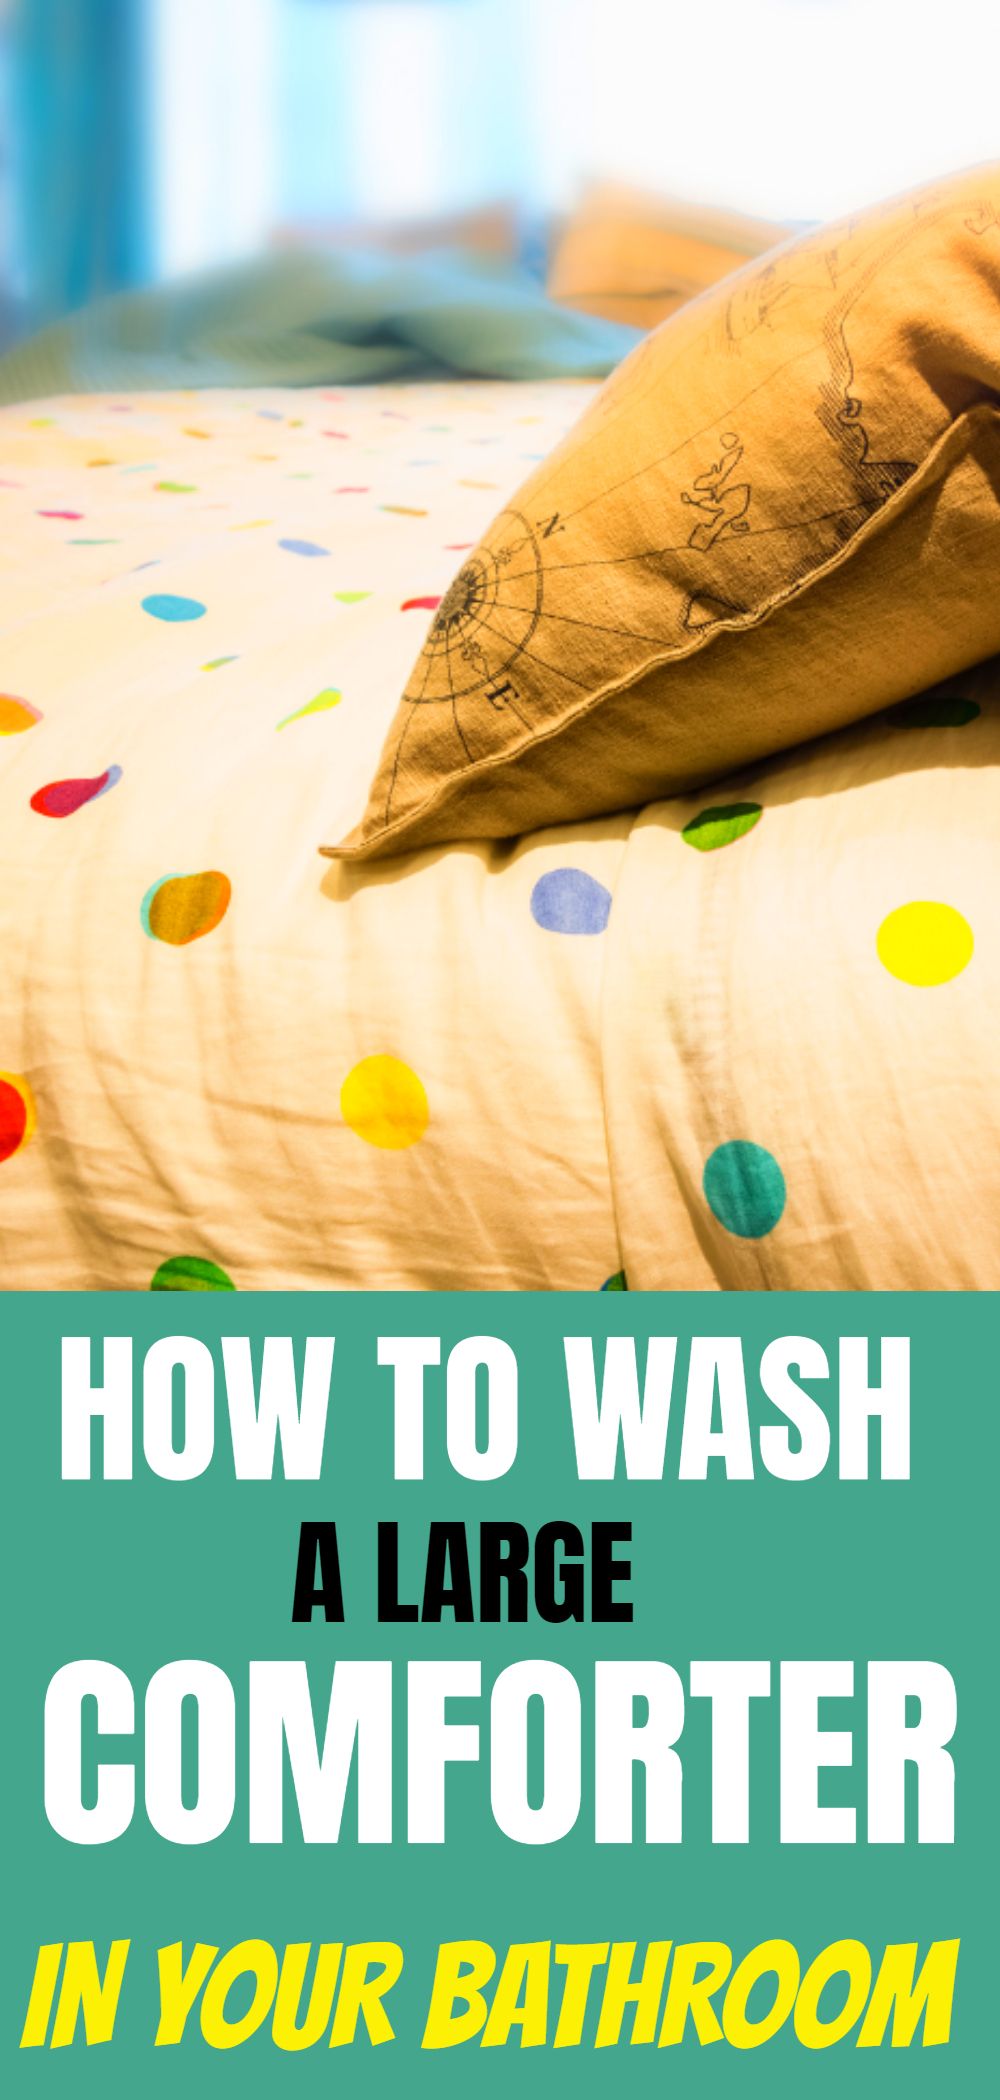 The Ultimate Guide To Maintaining A Clean And Fresh Comforter: How Often Should You Wash It?